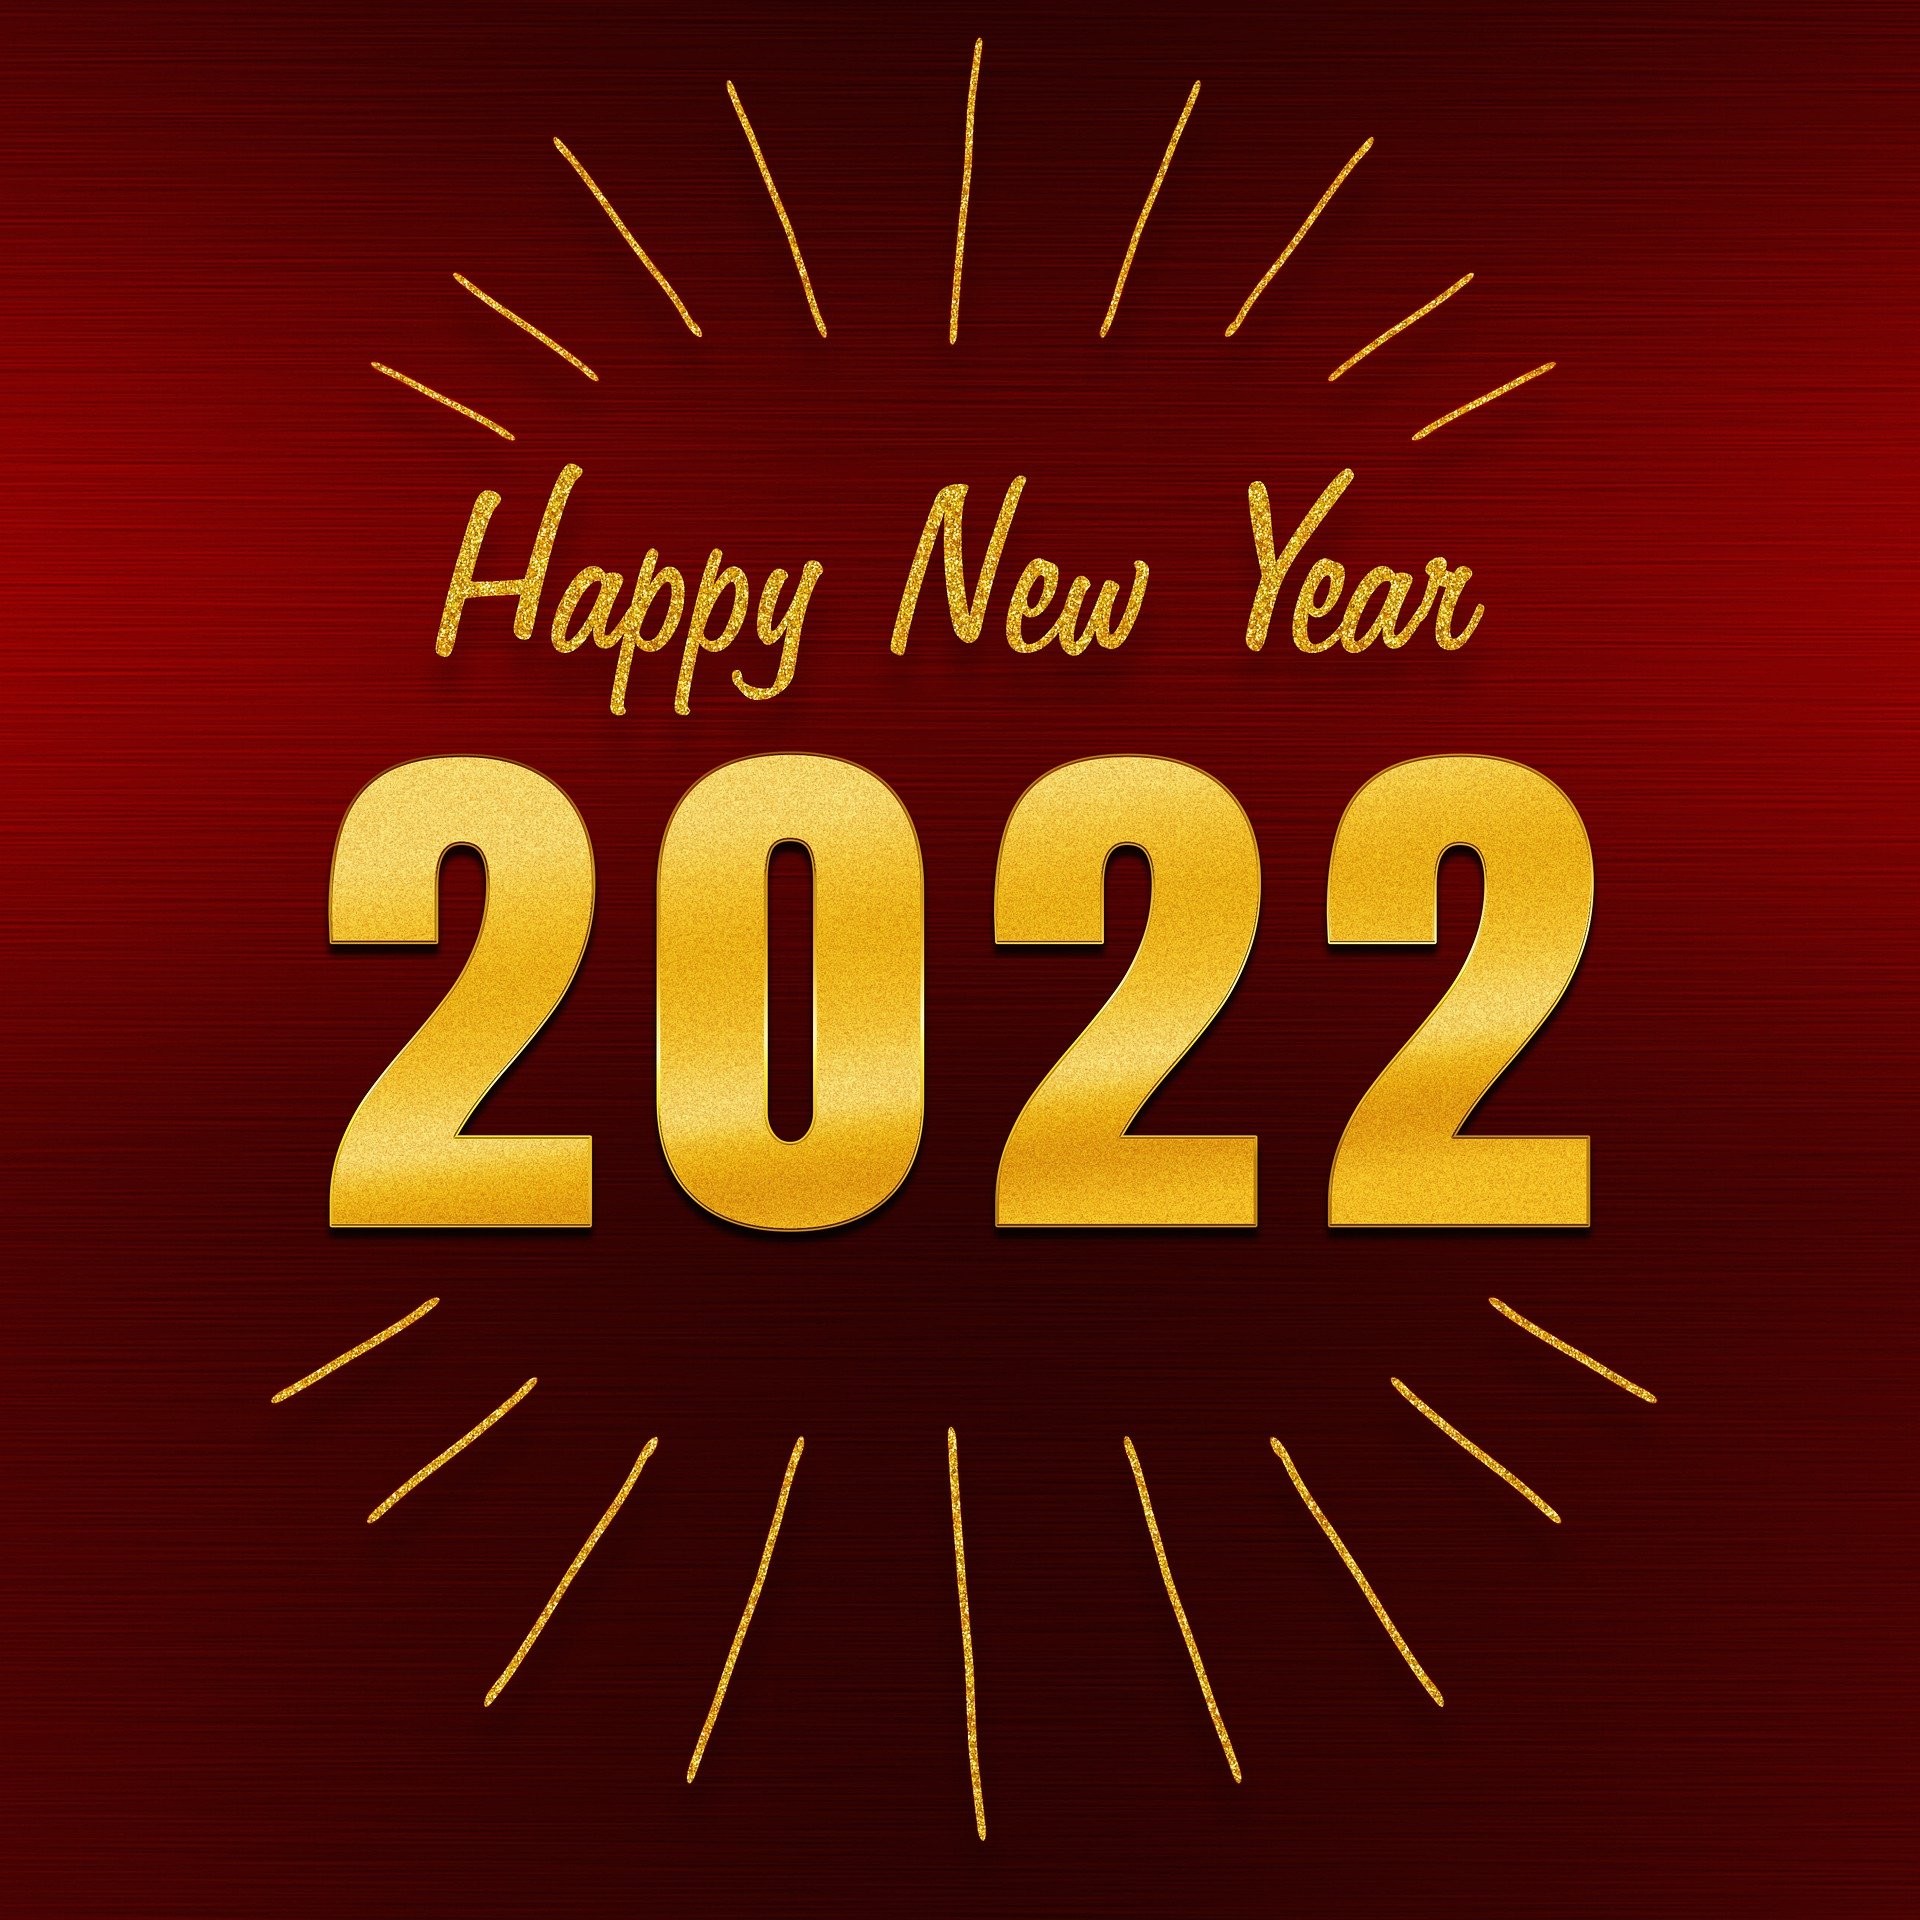 Happy new year 2022 wishes images | Happy new year 2022